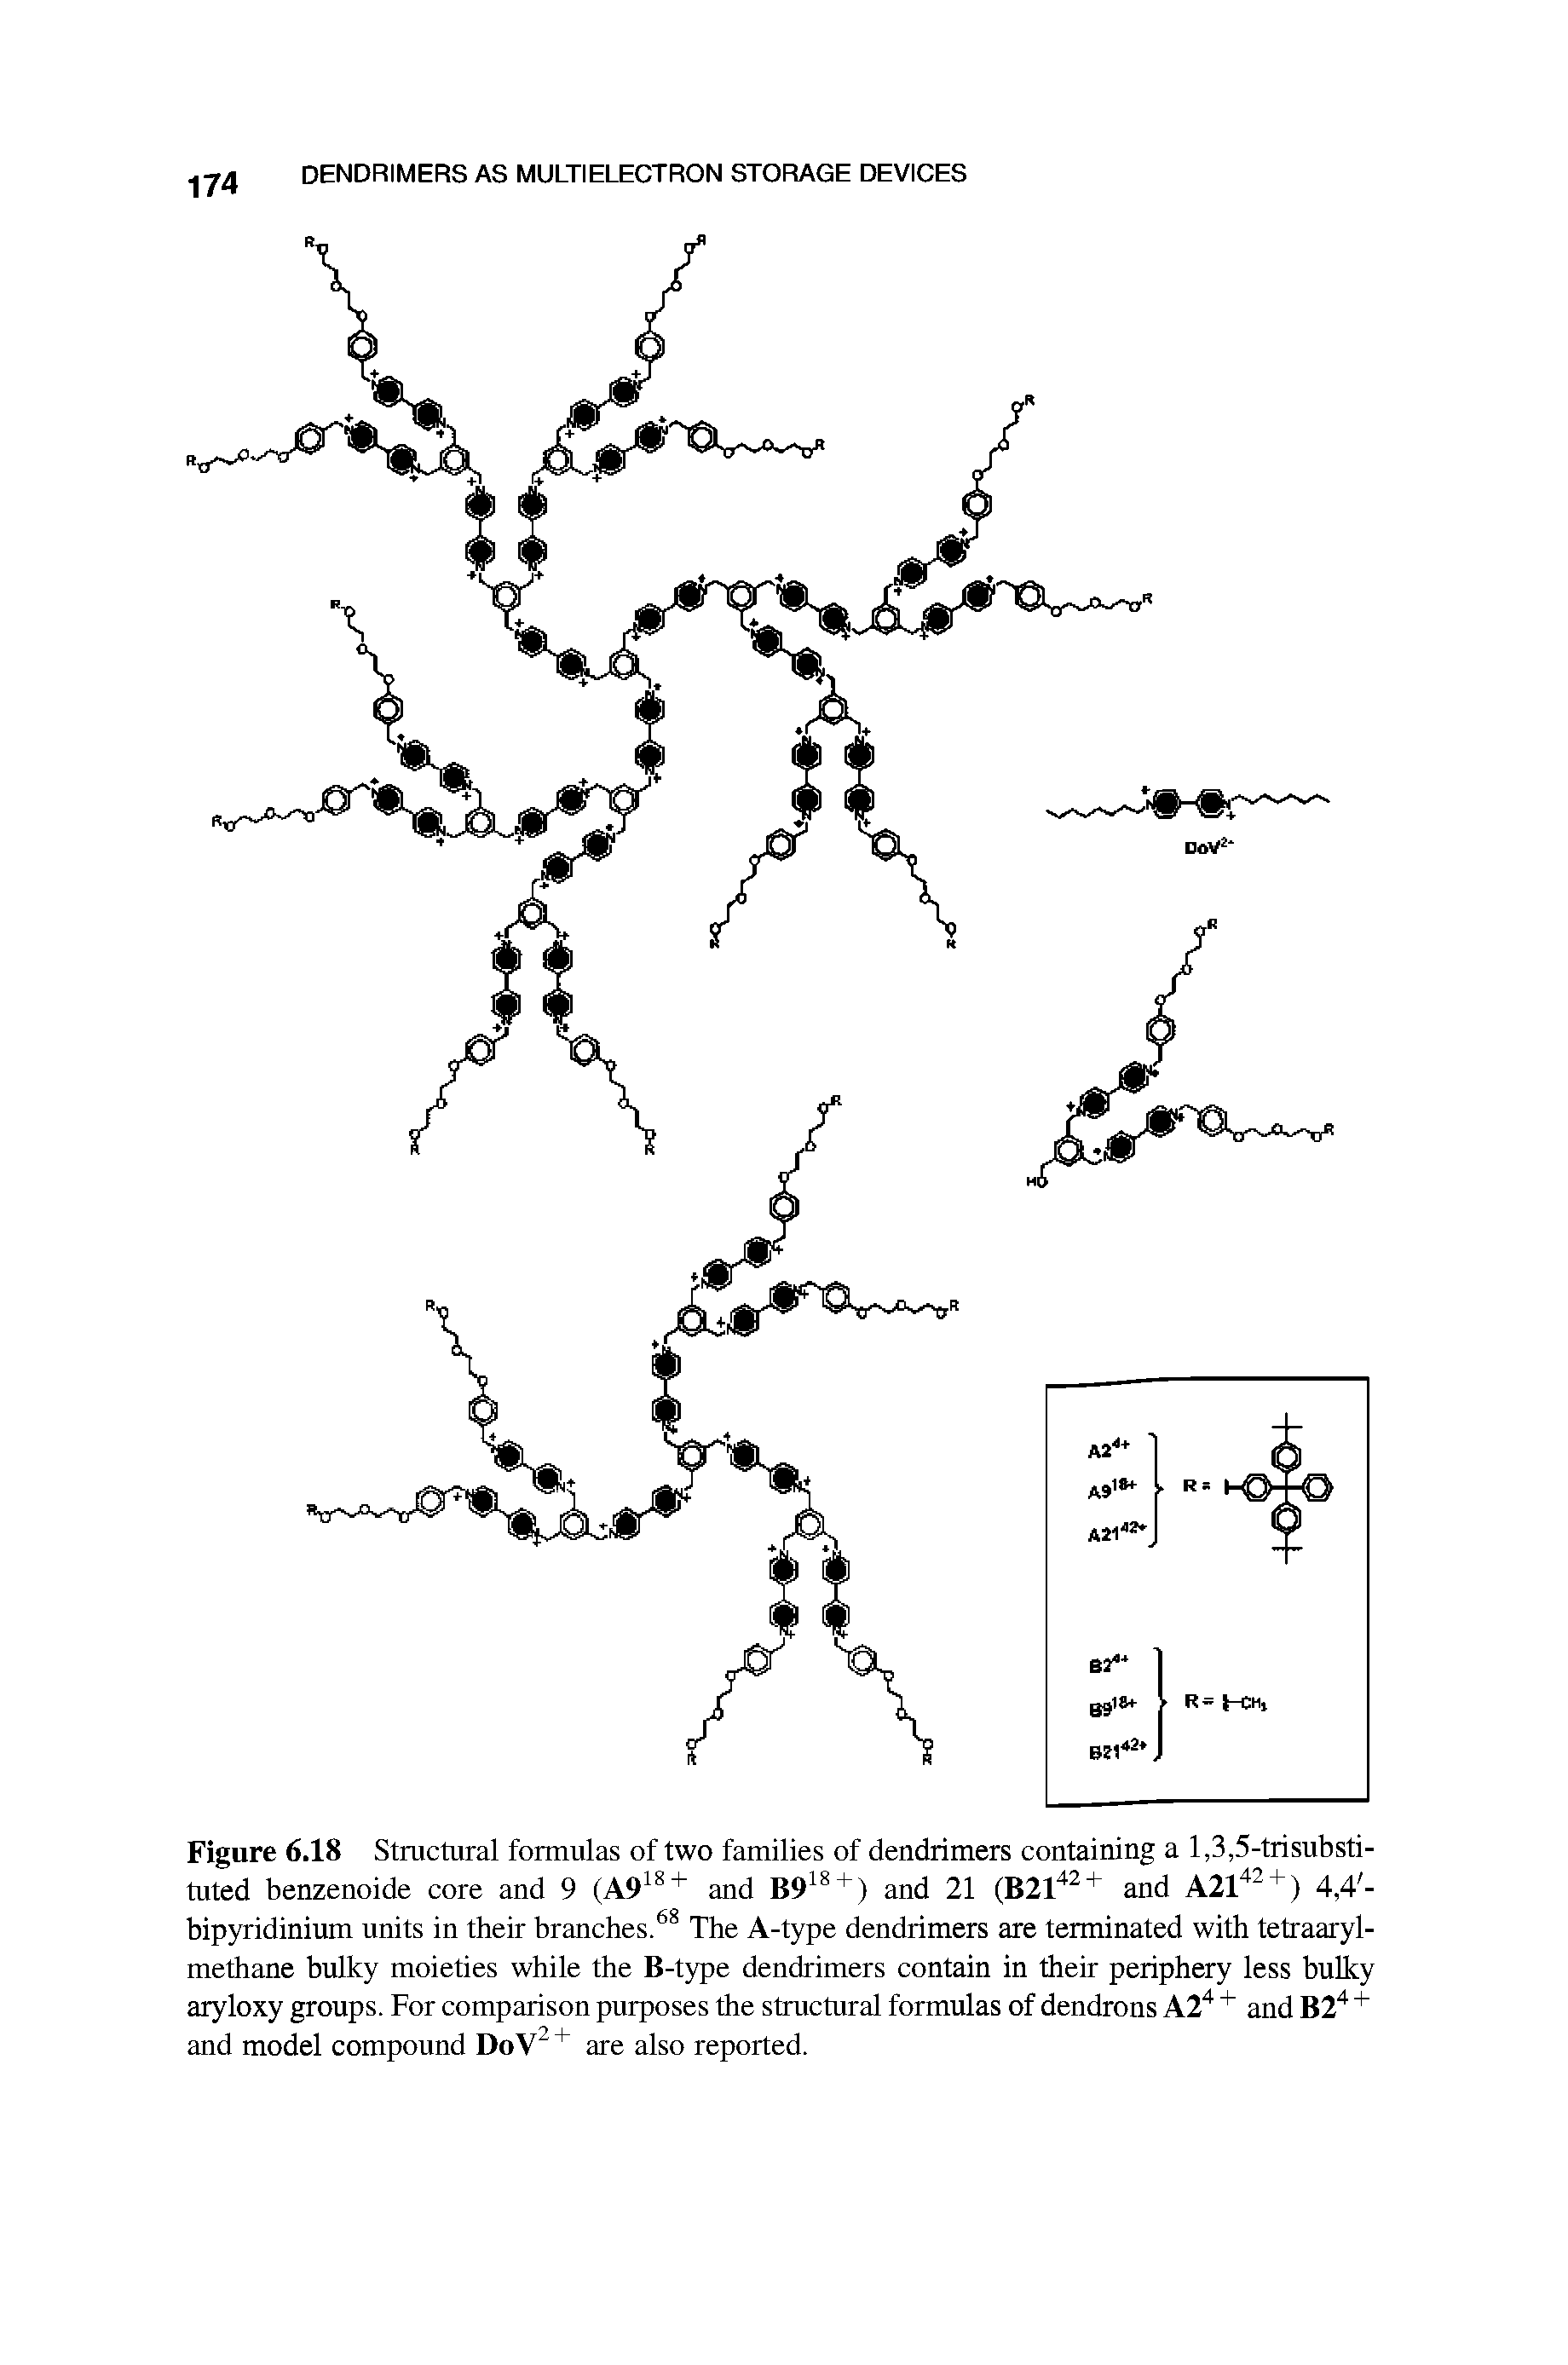 Figure 6.18 Structural formulas of two families of dendrimers containing a 1,3,5-trisubsti-tuted benzenoide core and 9 (A918 + and B918 + ) and 21 (B2142+ and A2142 + ) 4,4 -bipyridinium units in their branches.68 The -type dendrimers are terminated with tetraaryl-methane bulky moieties while the -type dendrimers contain in their periphery less bulky aryloxy groups. For comparison purposes the structural formulas of dendrons A24 + and B24 + and model compound DoV2 + are also reported.